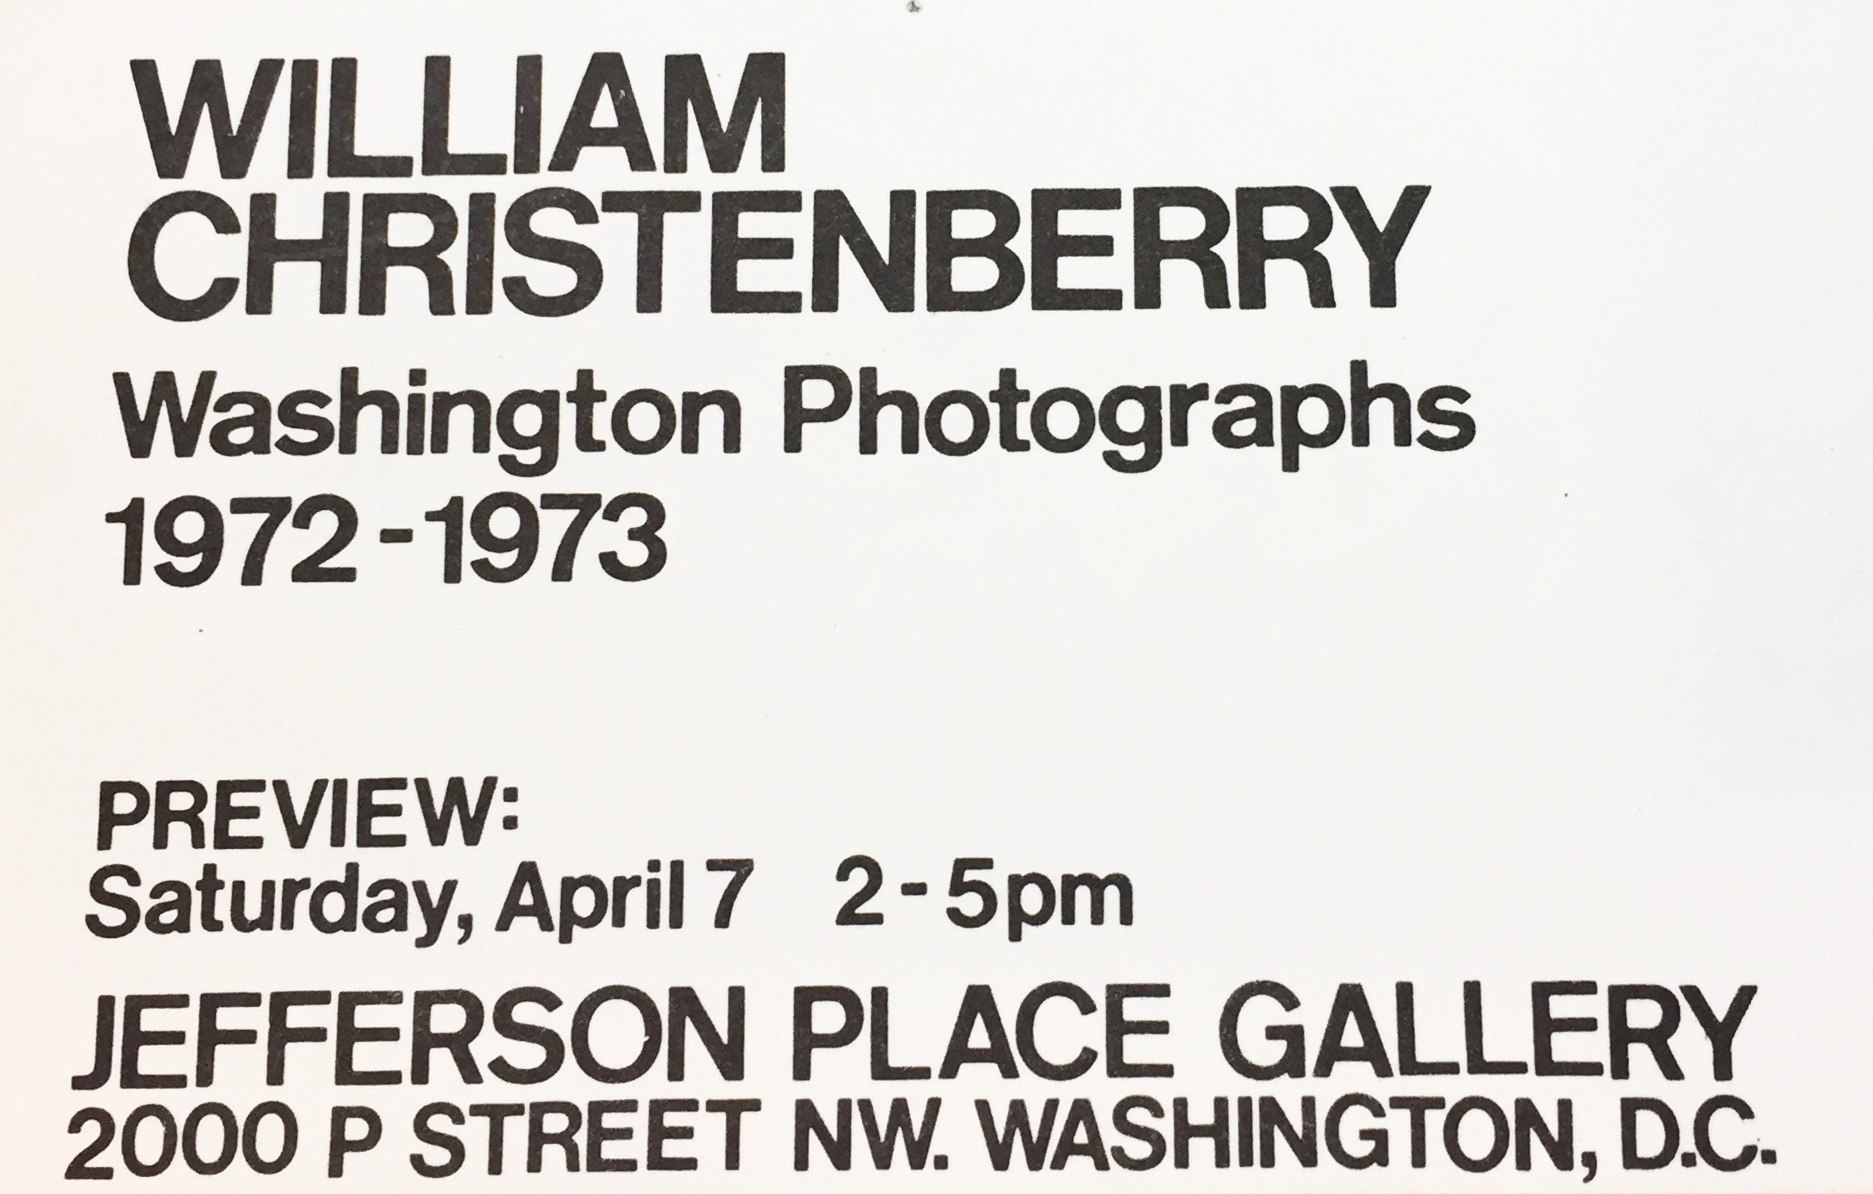 Announcement card for William Christenberry at Jefferson Place Gallery